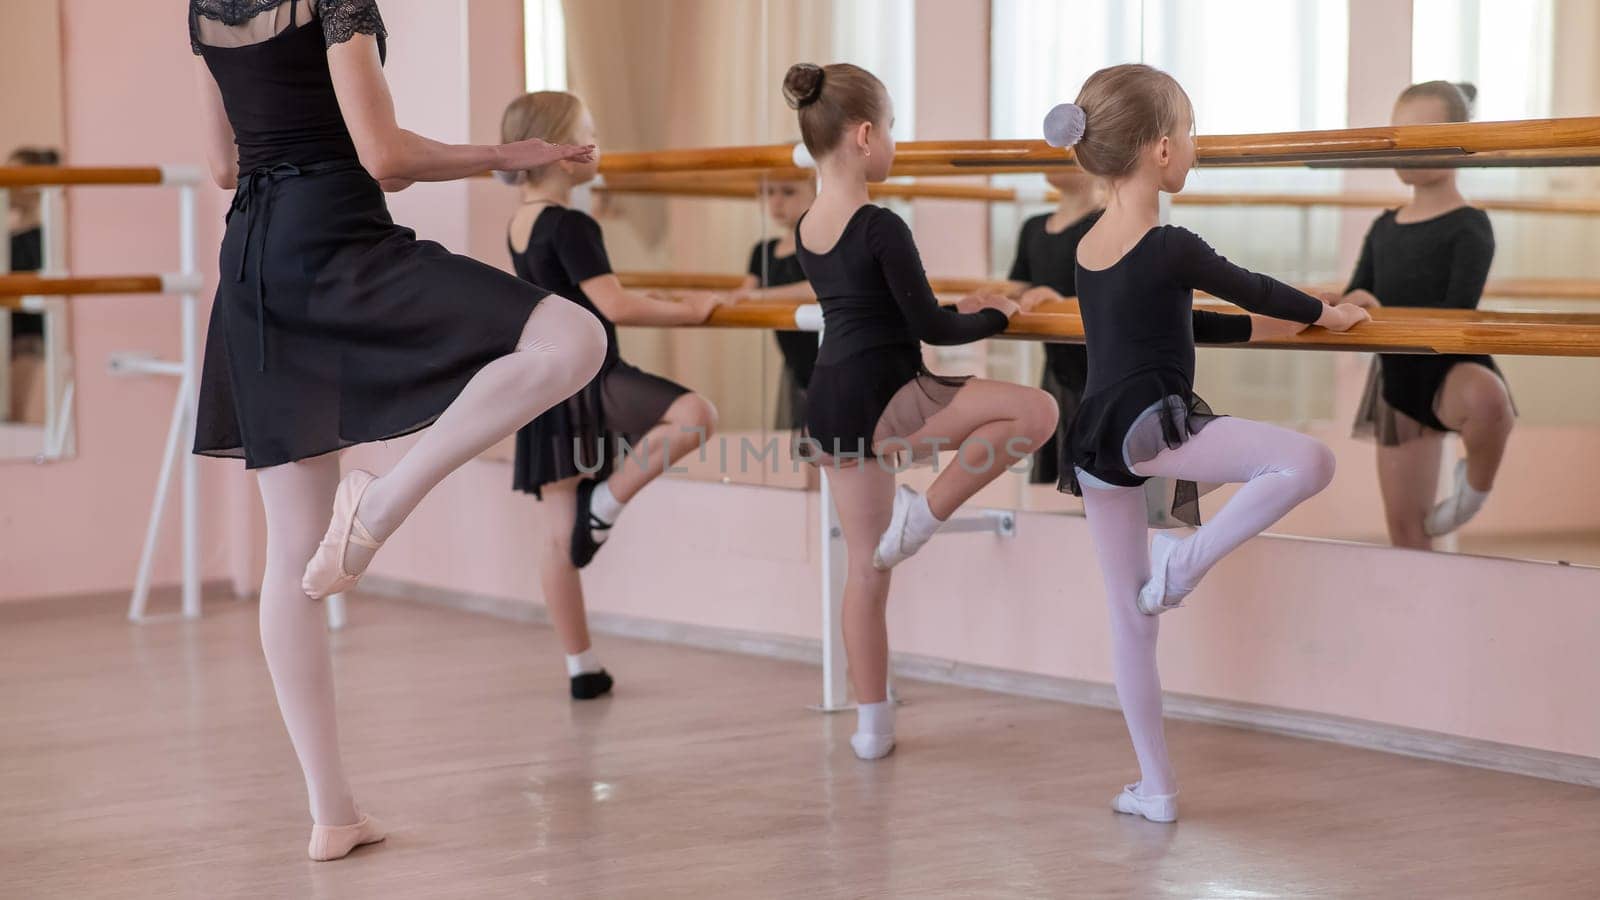 Caucasian woman teaches little girls ballet at the barre. by mrwed54